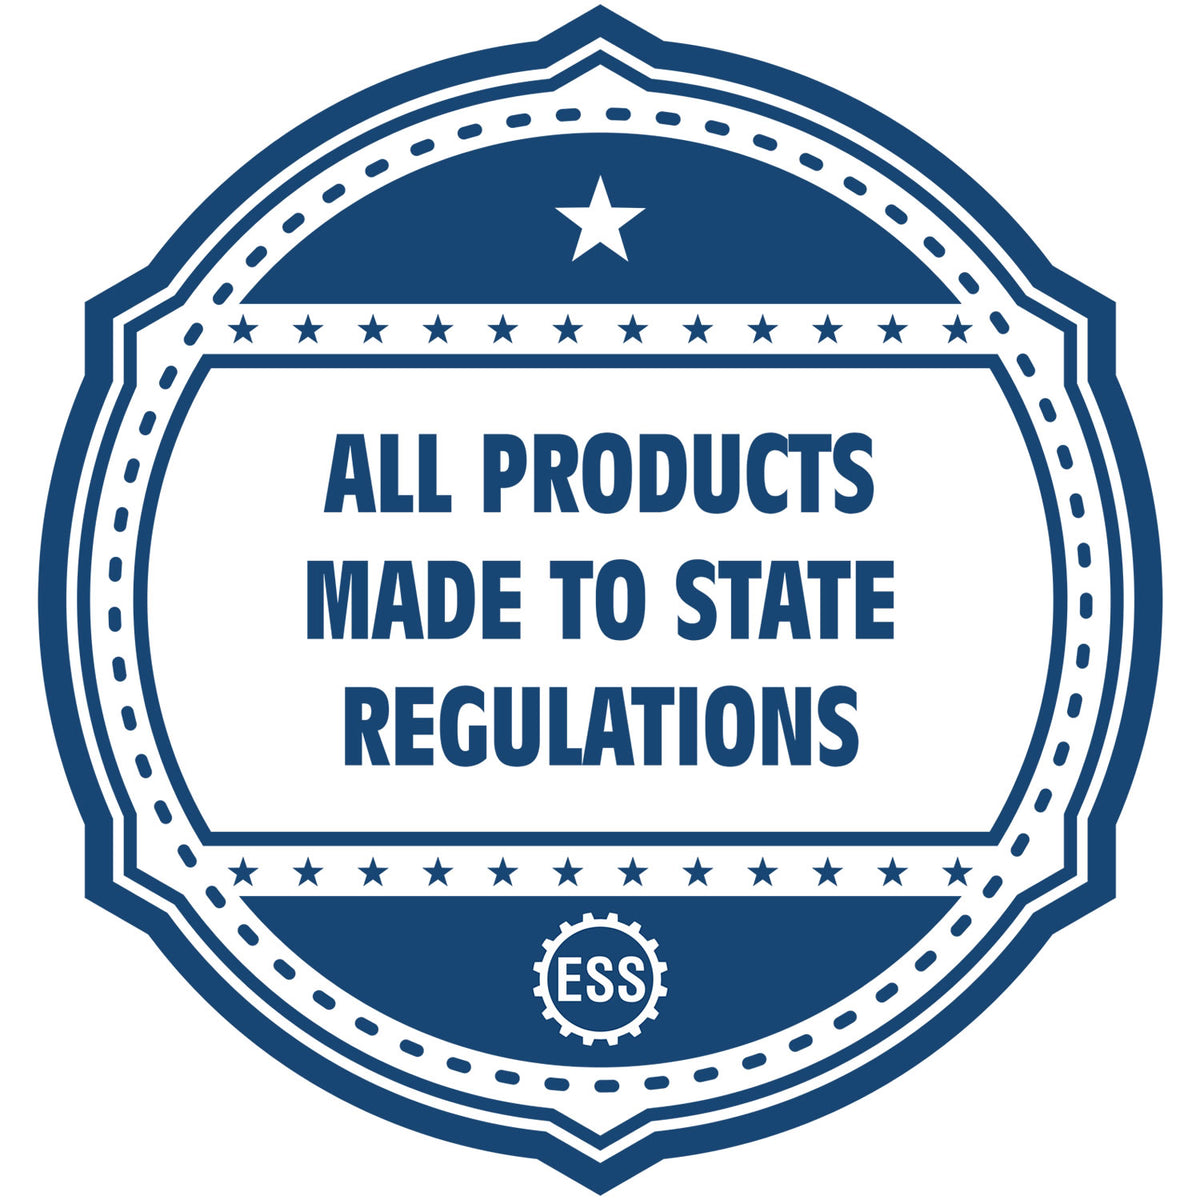 An icon or badge element for the Self-Inking New Hampshire PE Stamp showing that this product is made in compliance with state regulations.